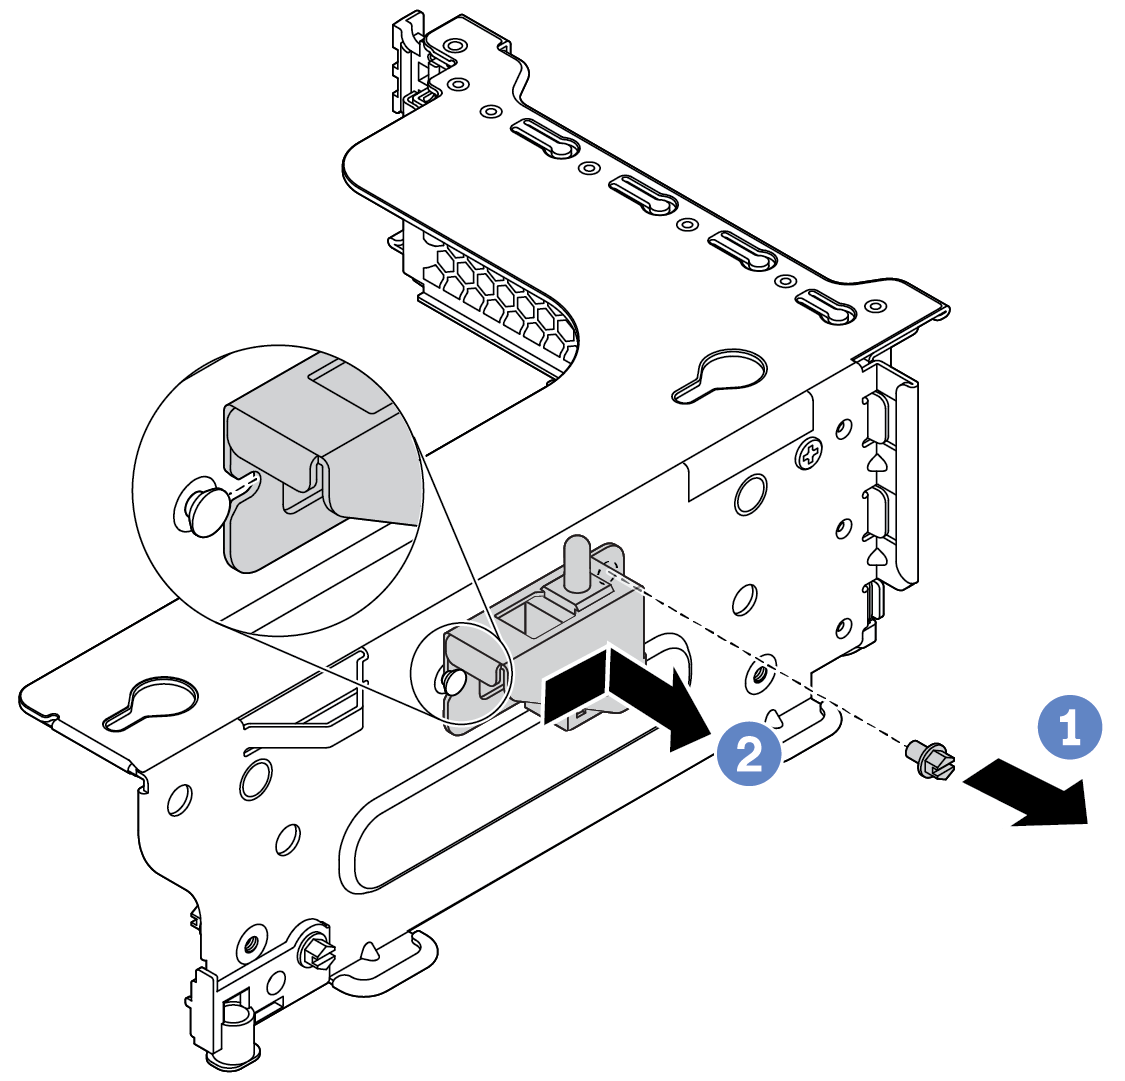 Intrusion switch assembly removal